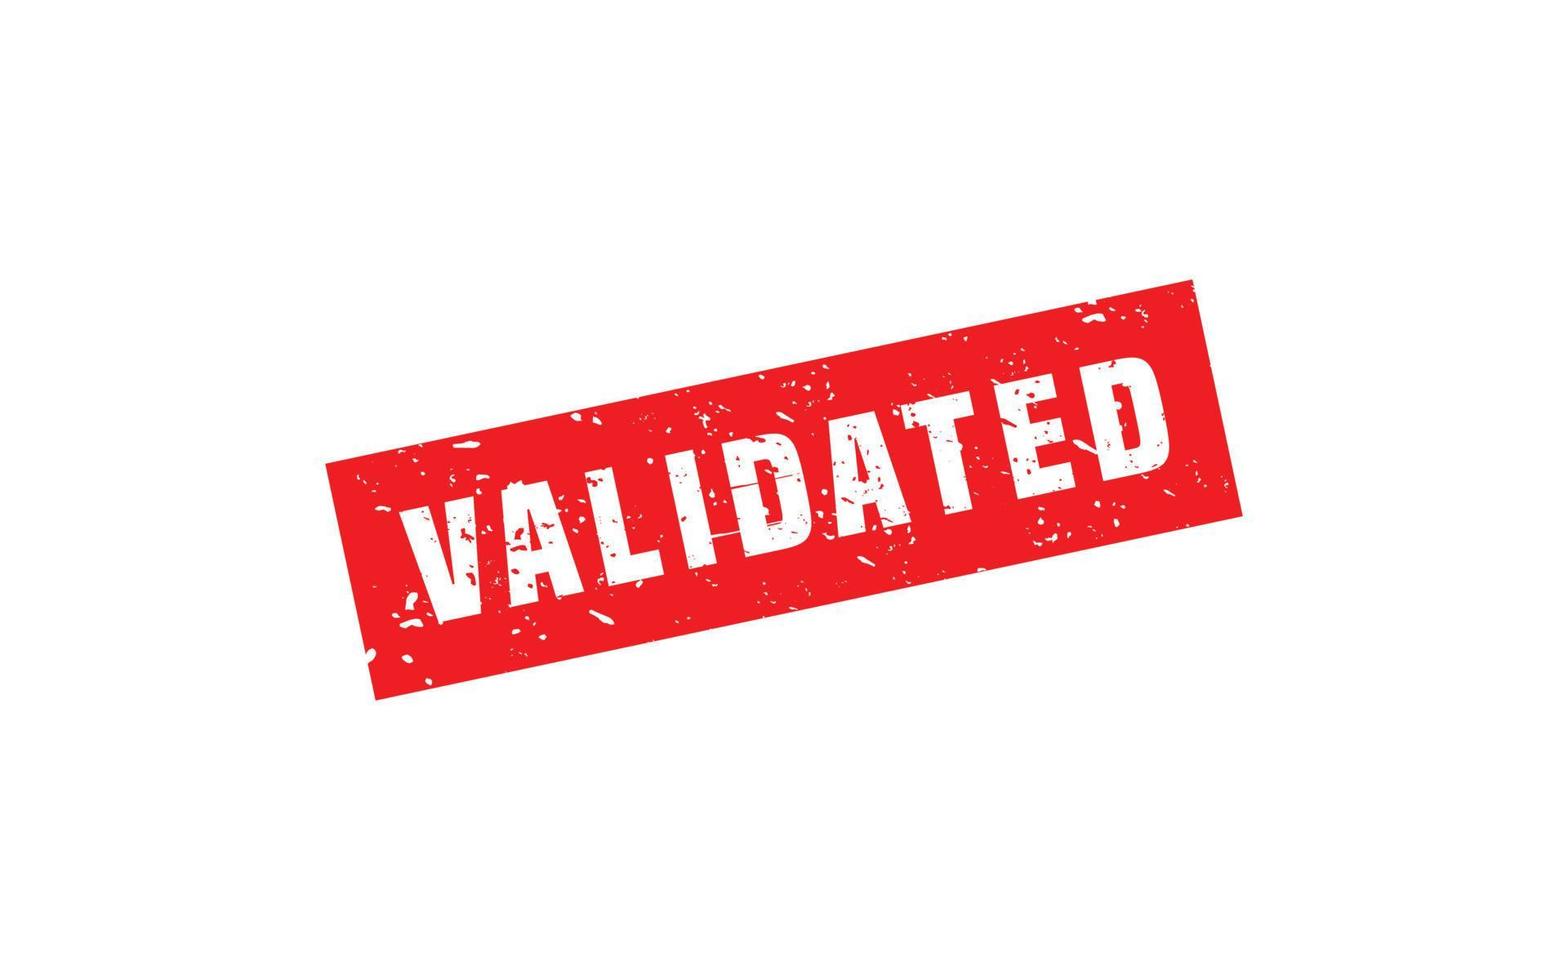 VALIDATED rubber stamp with grunge style on white background vector